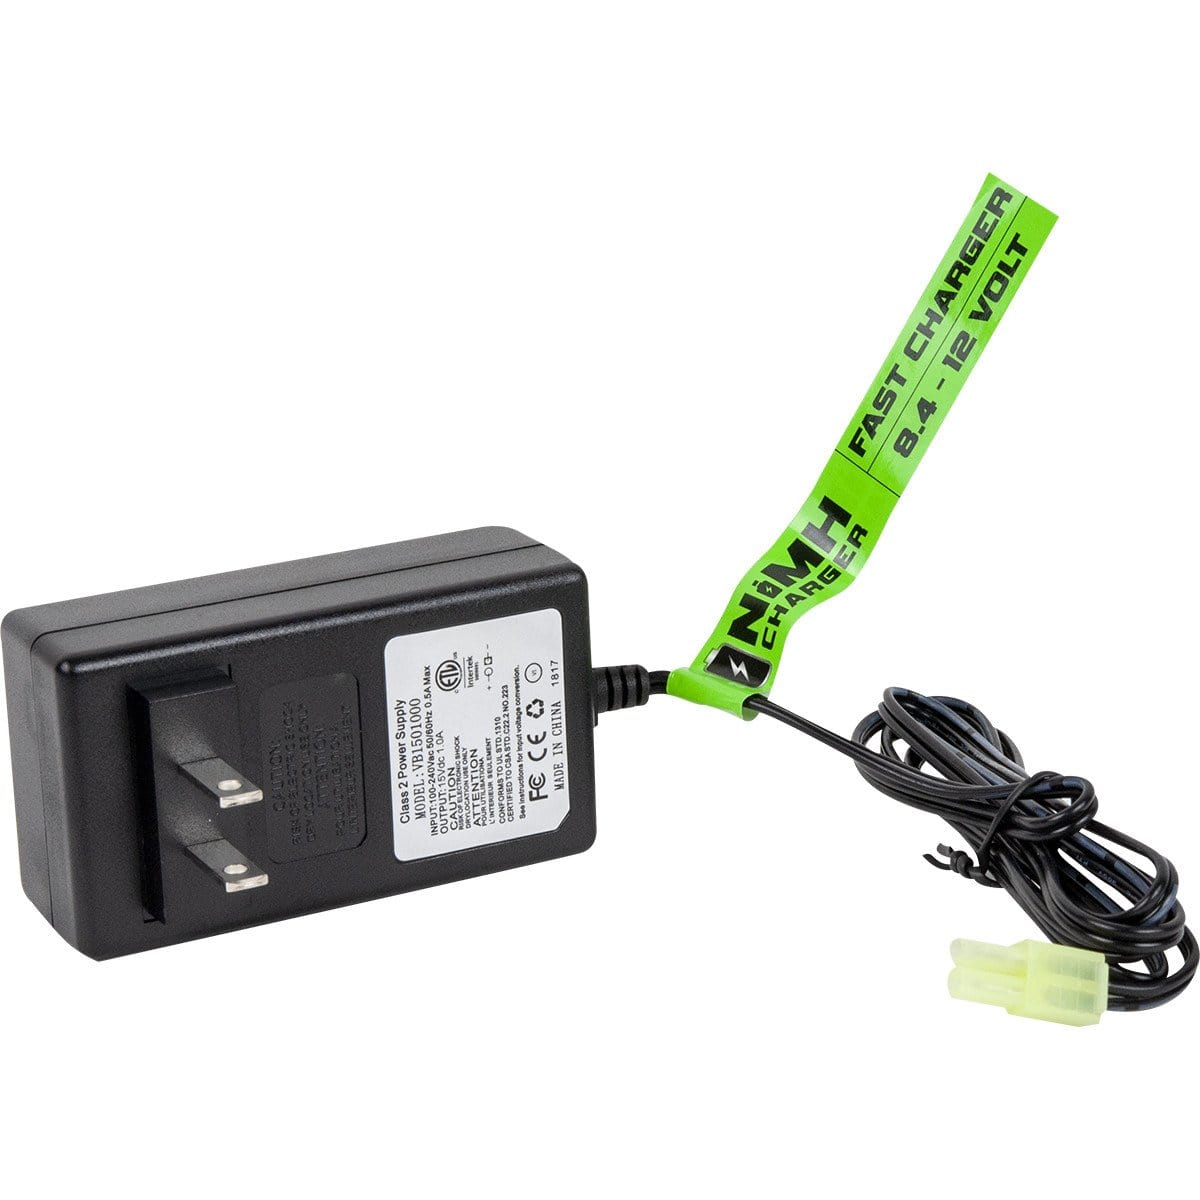 Valken Airsoft NiMH Smart Battery Charger - Fast 1A - 8.4V-12V - Eminent Paintball And Airsoft